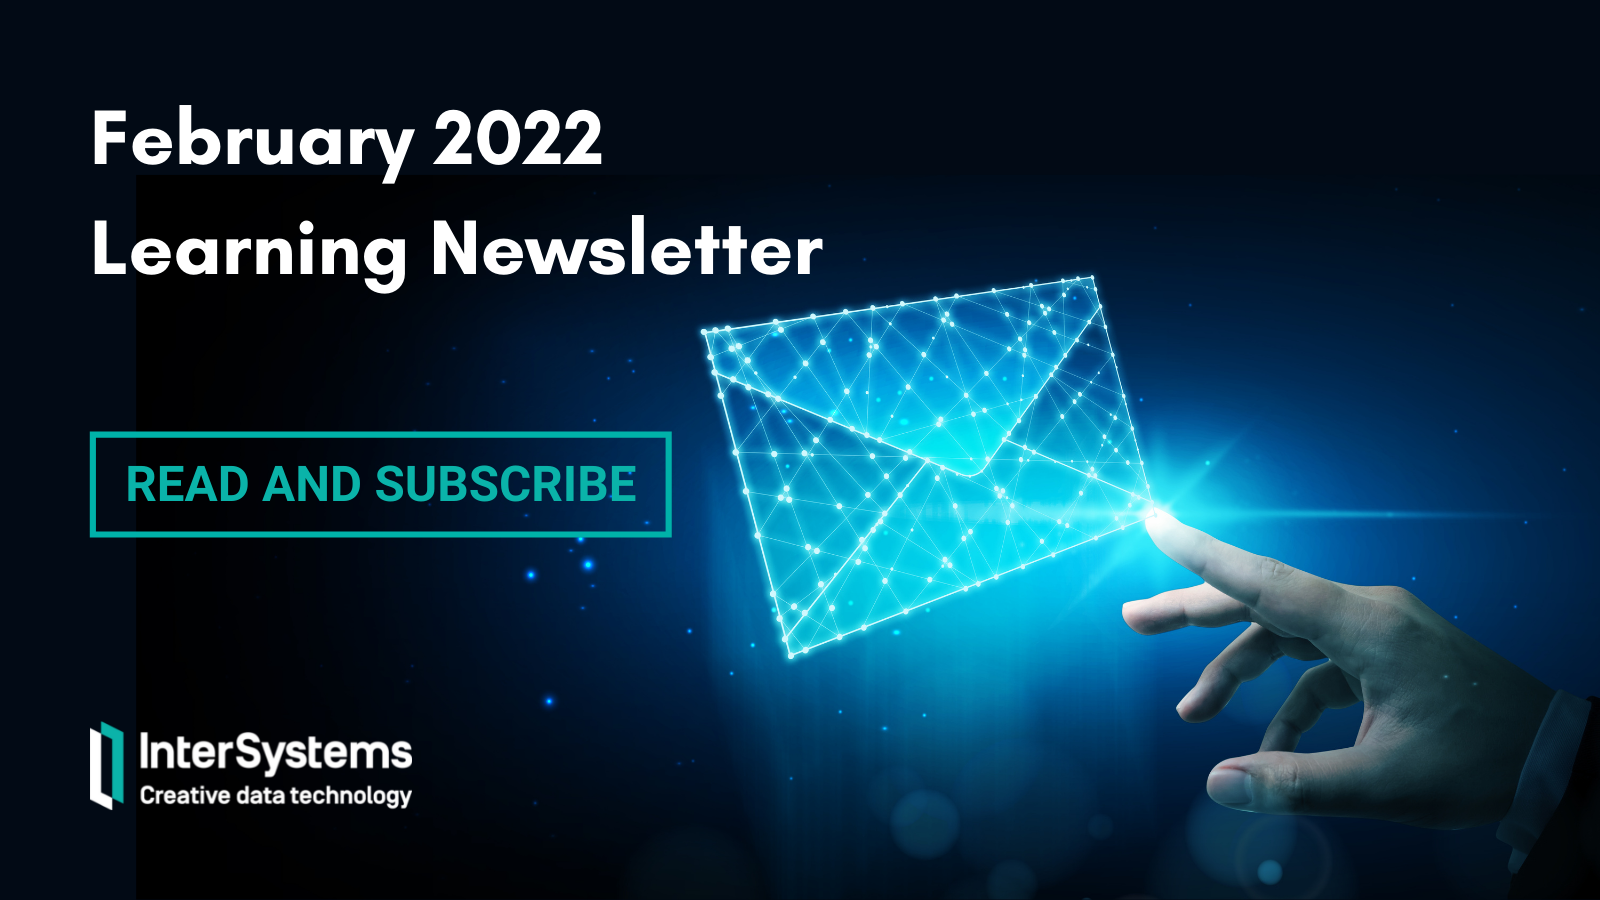 February 2022 Learning Newsletter: Read and Subscribe.